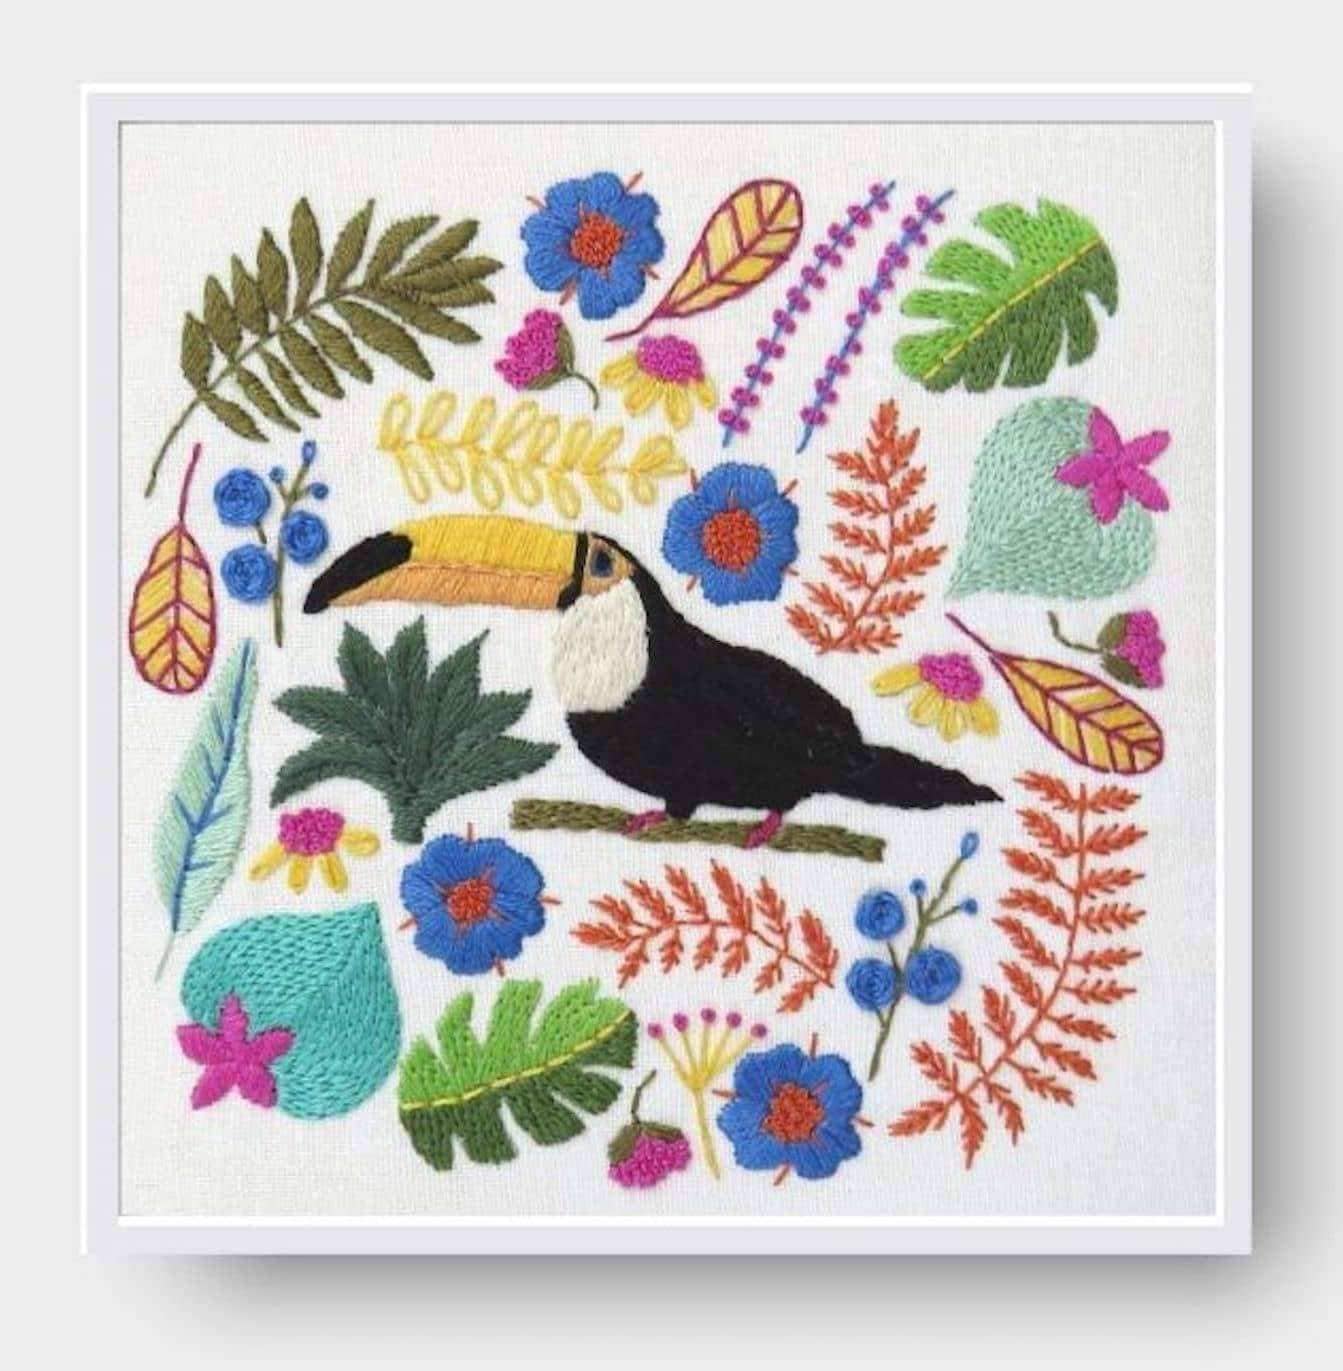 Toucan Parrot Hand Embroidery Pattern , PDF Download , StitchDoodles , bird embroidery, embroidery hoop kit, embroidery kit for adults, embroidery kit for beginners, embroidery kits for adults, embroidery kits for beginers, flower embroidery, hand embroidery, modern embroidery kits, PDF pattern , StitchDoodles , shop.stitchdoodles.com